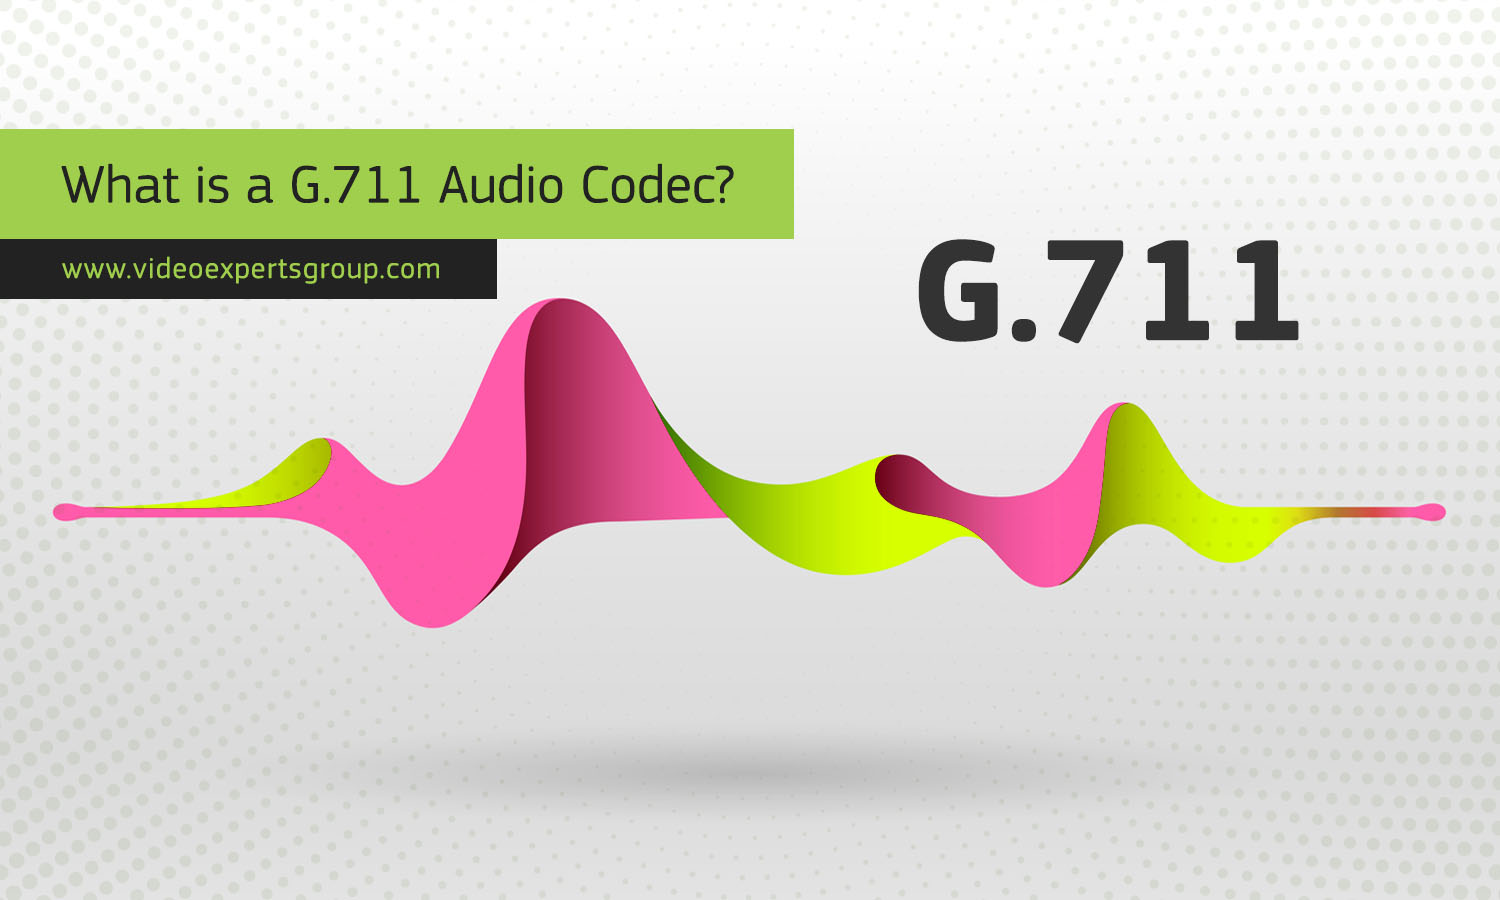 What is a G.711 Audio Codec?